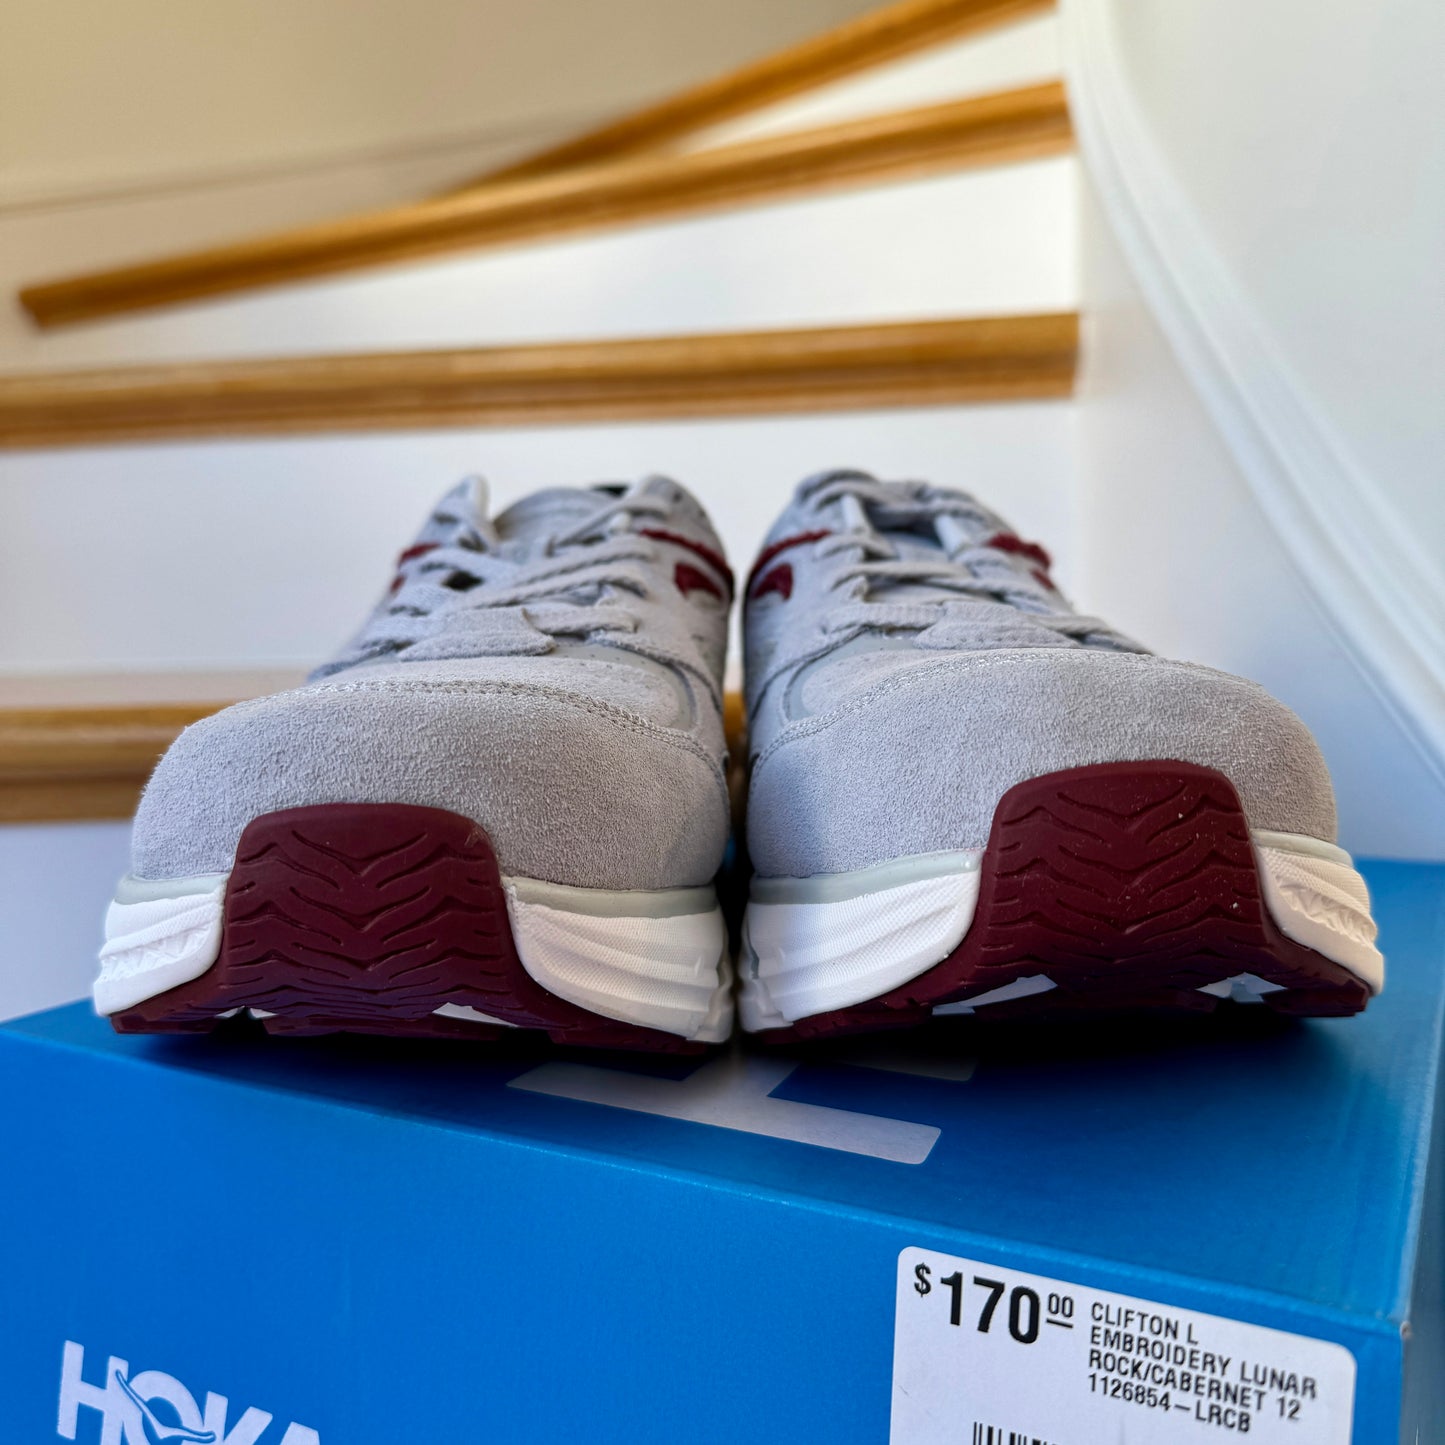 Hoka Clifton Suede Embroidery L Leather Unisex  Grey / Maroon Red